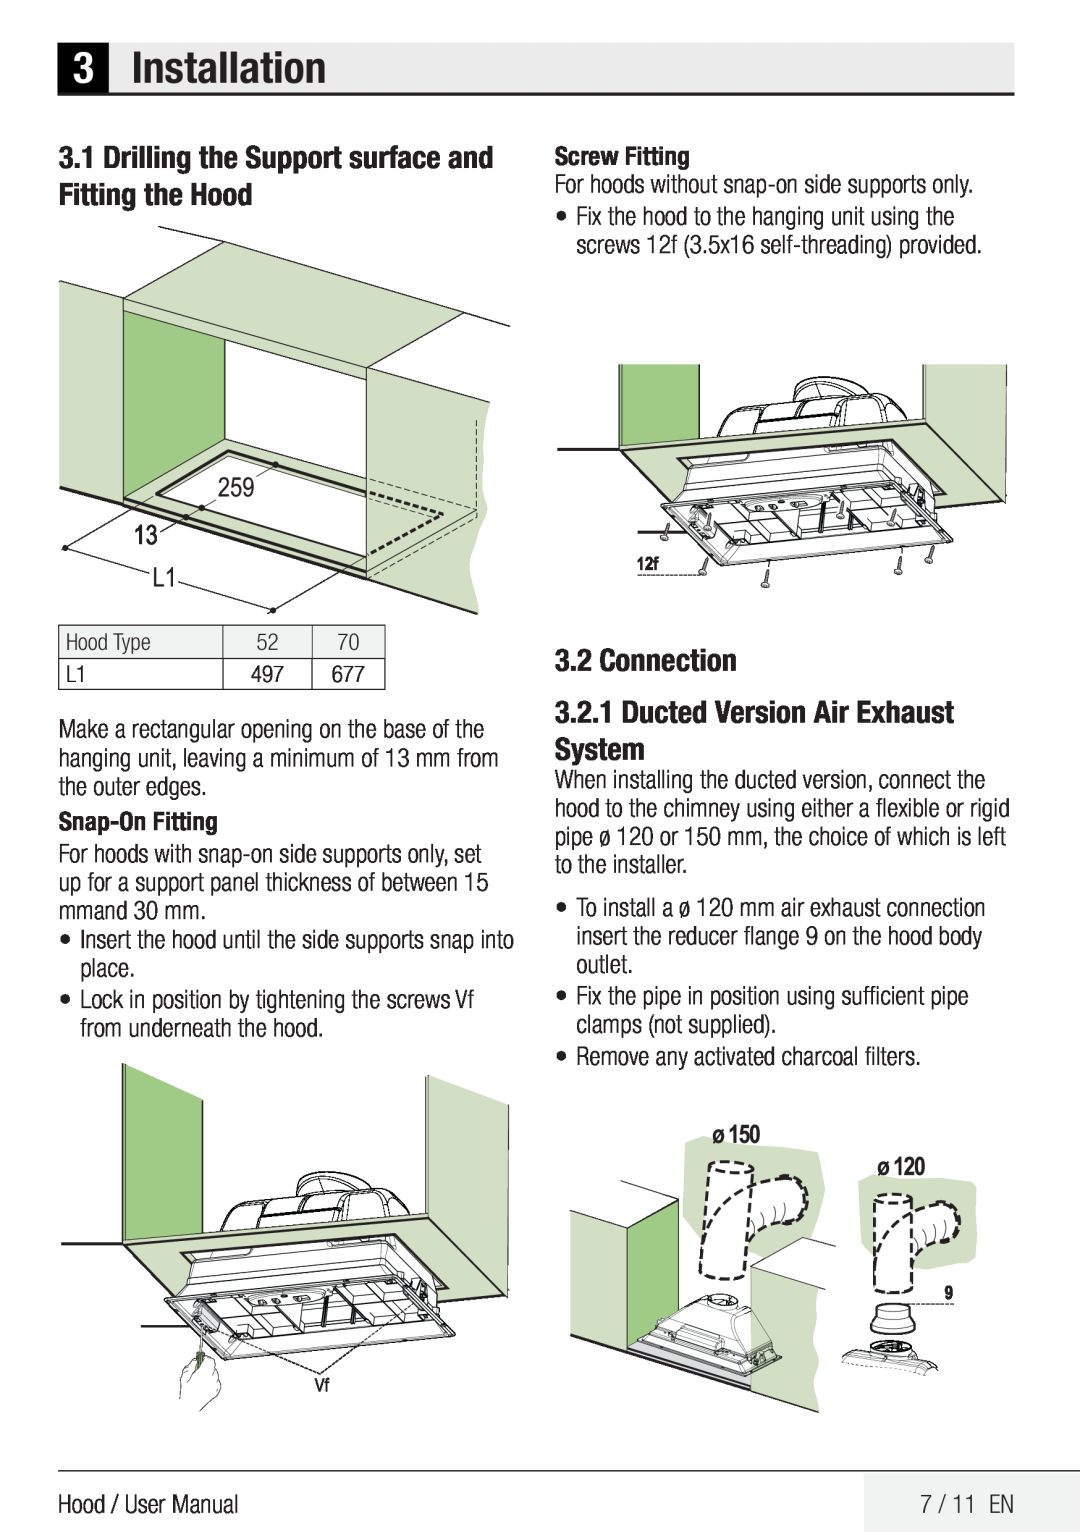 Beko CCB 7140 XA user manual 3Installation, Connection, 3.2.1Ducted Version Air Exhaust System 